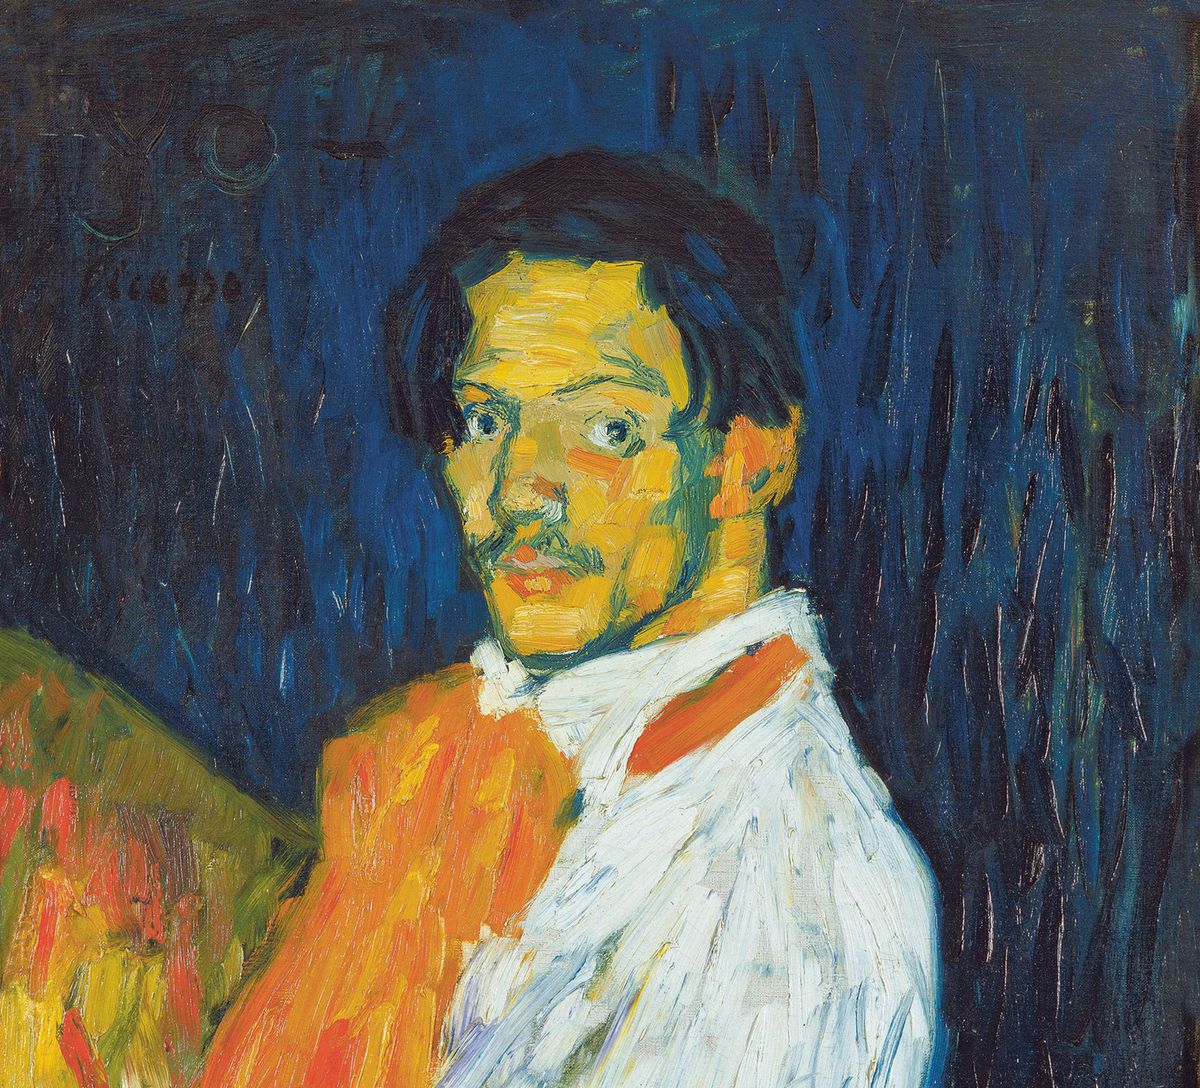 Yo Picasso (detail, 1901) from the Beyler show, which included works made by the artist between 1901 and 1907 © Succession Picasso/ProLitteris, Zürich; Image © Art Resource, New York/Scala, Florence